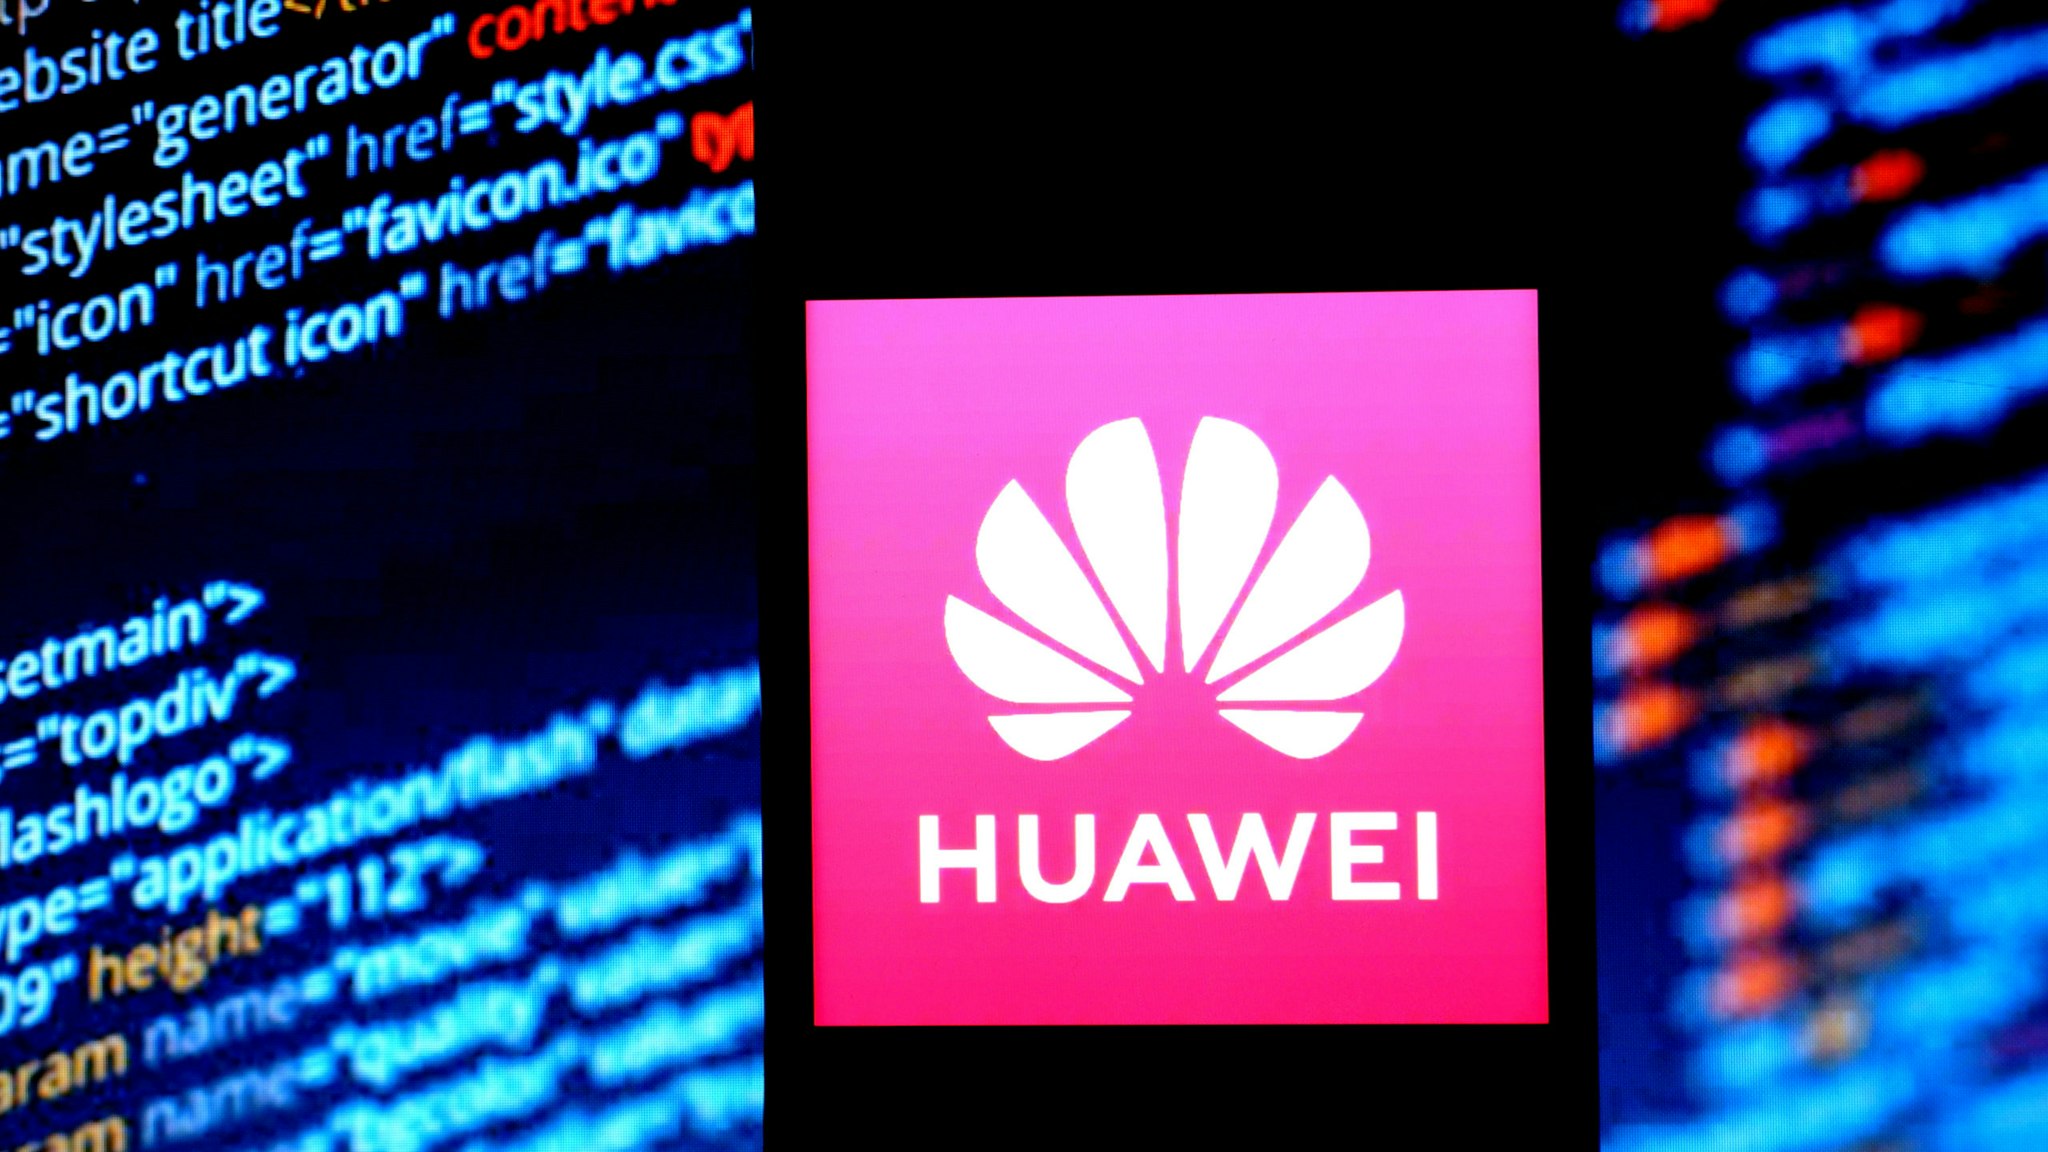 INDIA - 2020/02/09: In this photo illustration a telecommunications equipment company Huawei logo seen displayed on a smartphone.